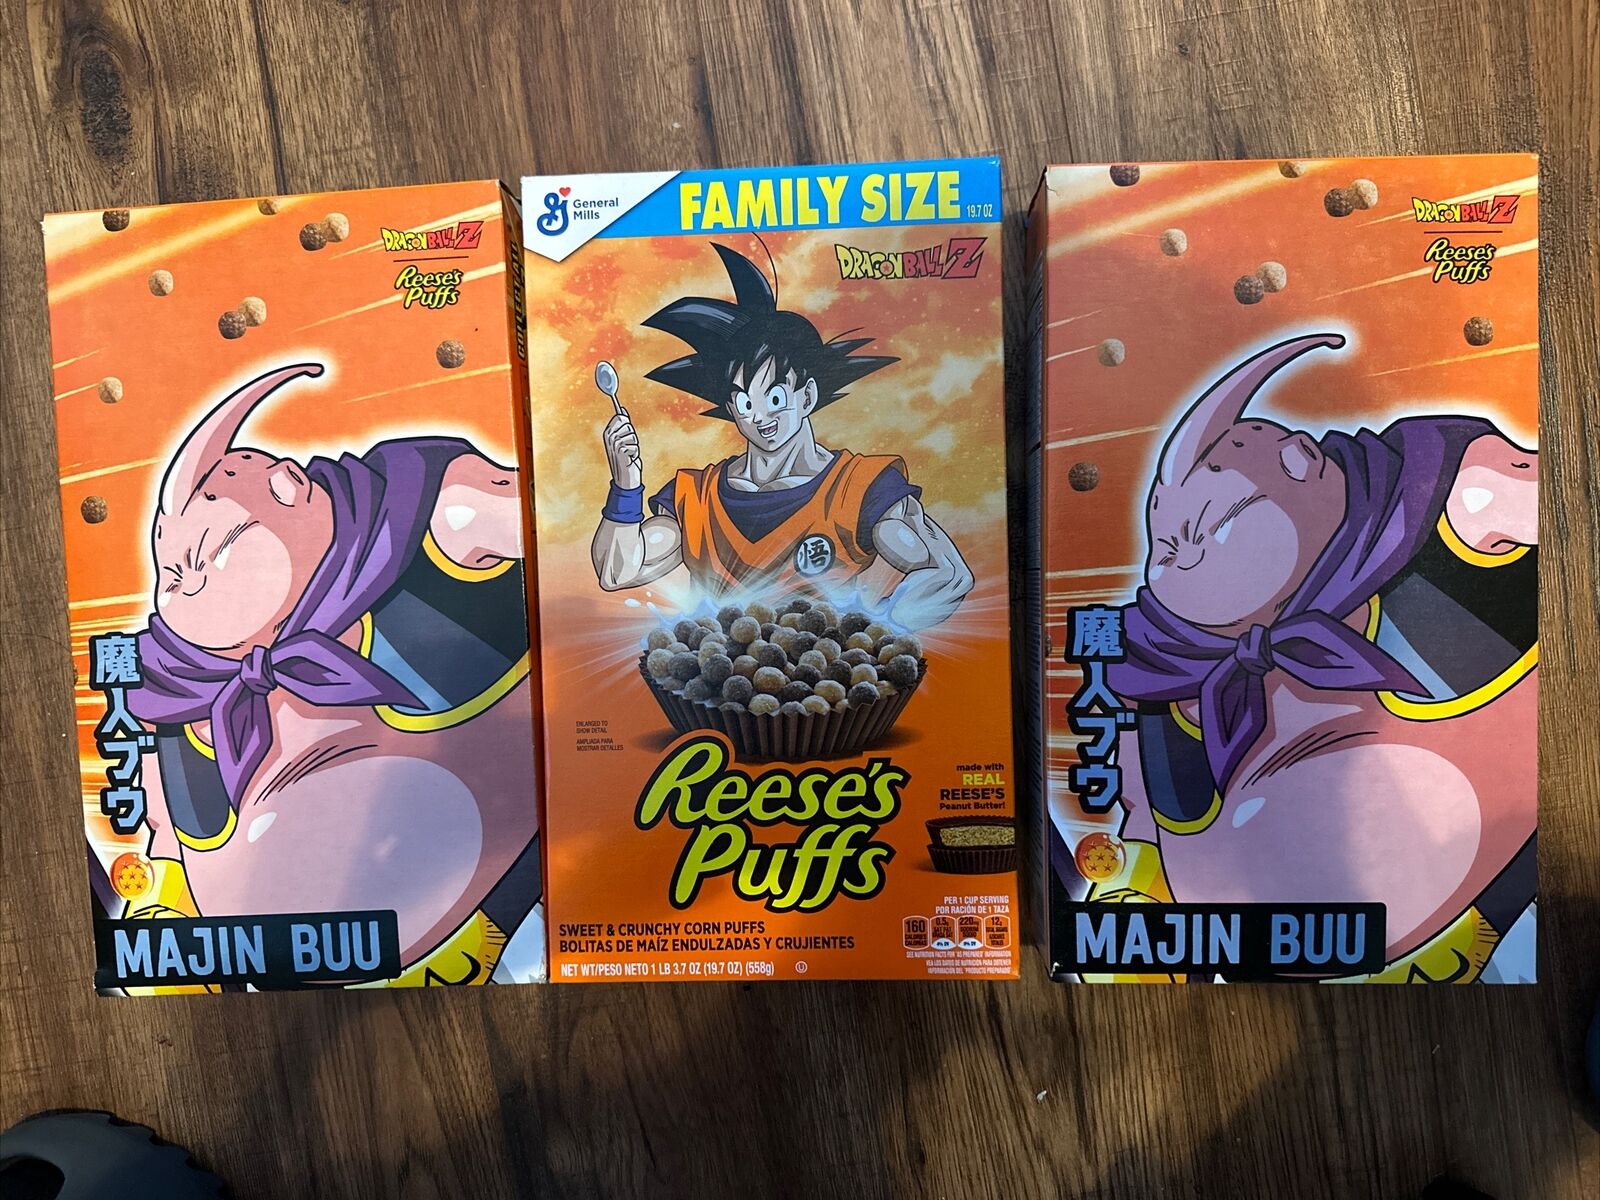 Dragon Ball Z Reese’s Puffs Cereal Limited Edition Sealed DBZ Box (Majin Buu)